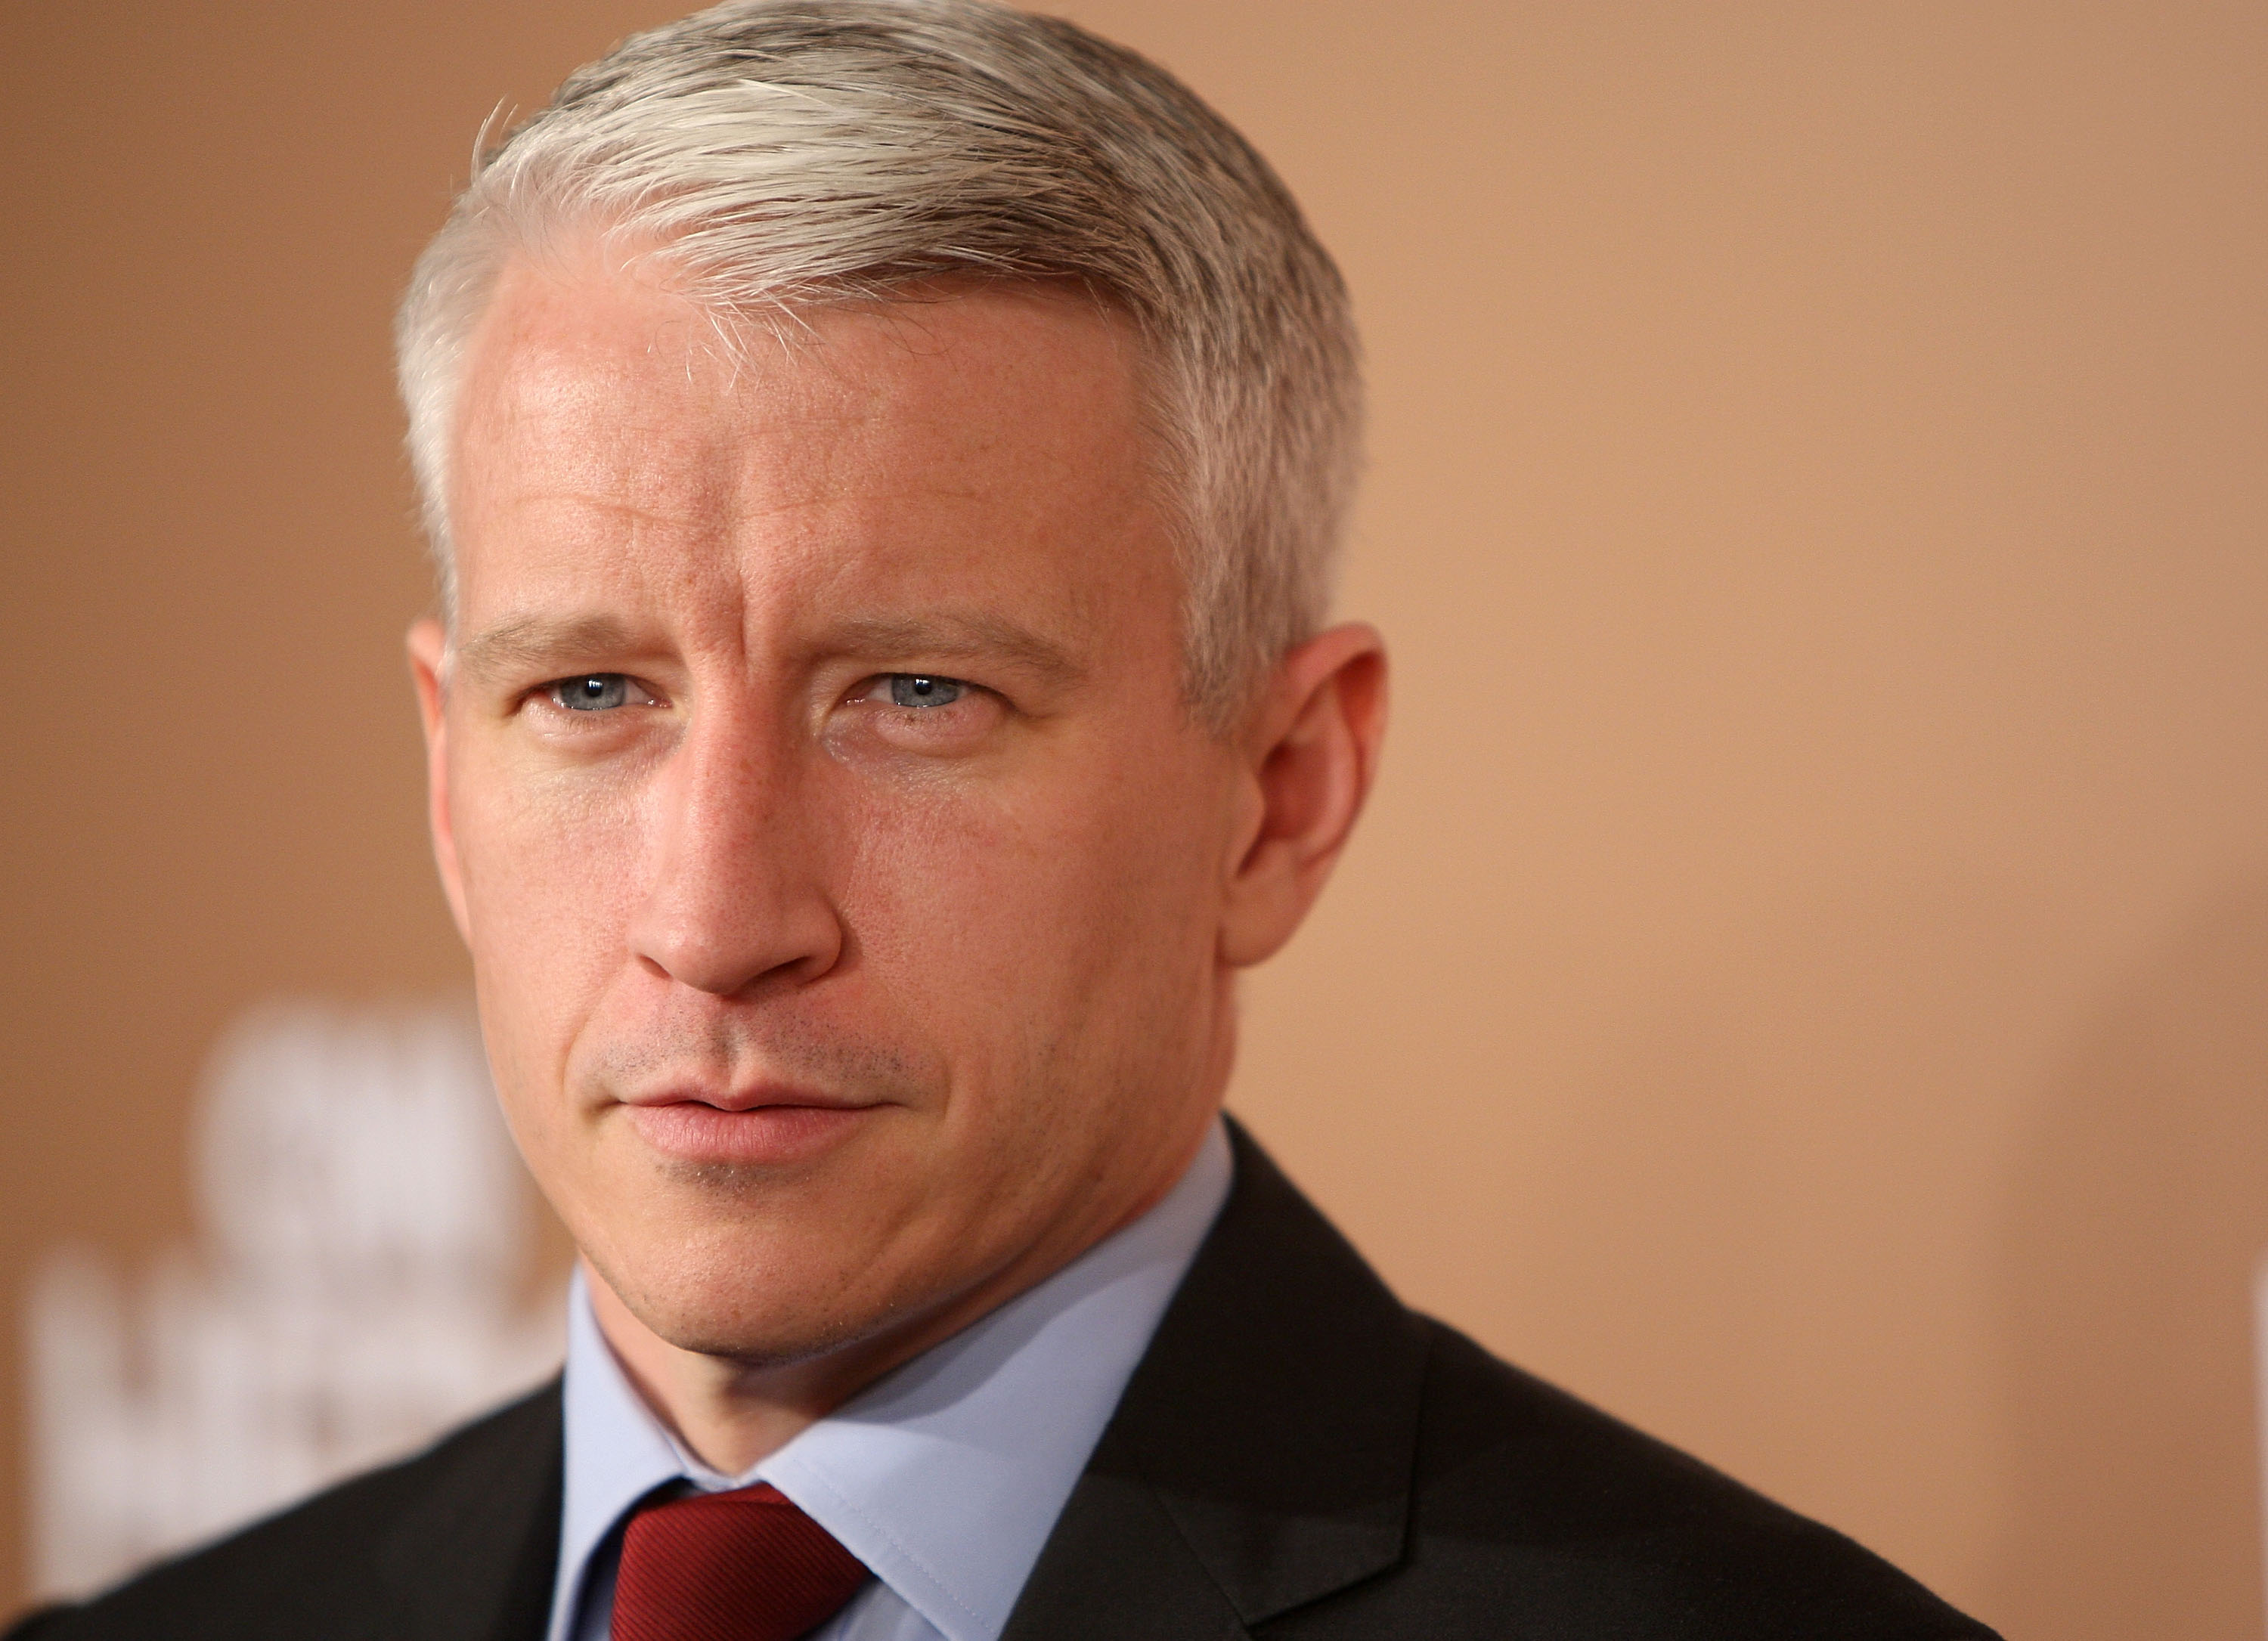 Anderson Cooper on December 6, 2007 in New York City. | Source: Getty Images